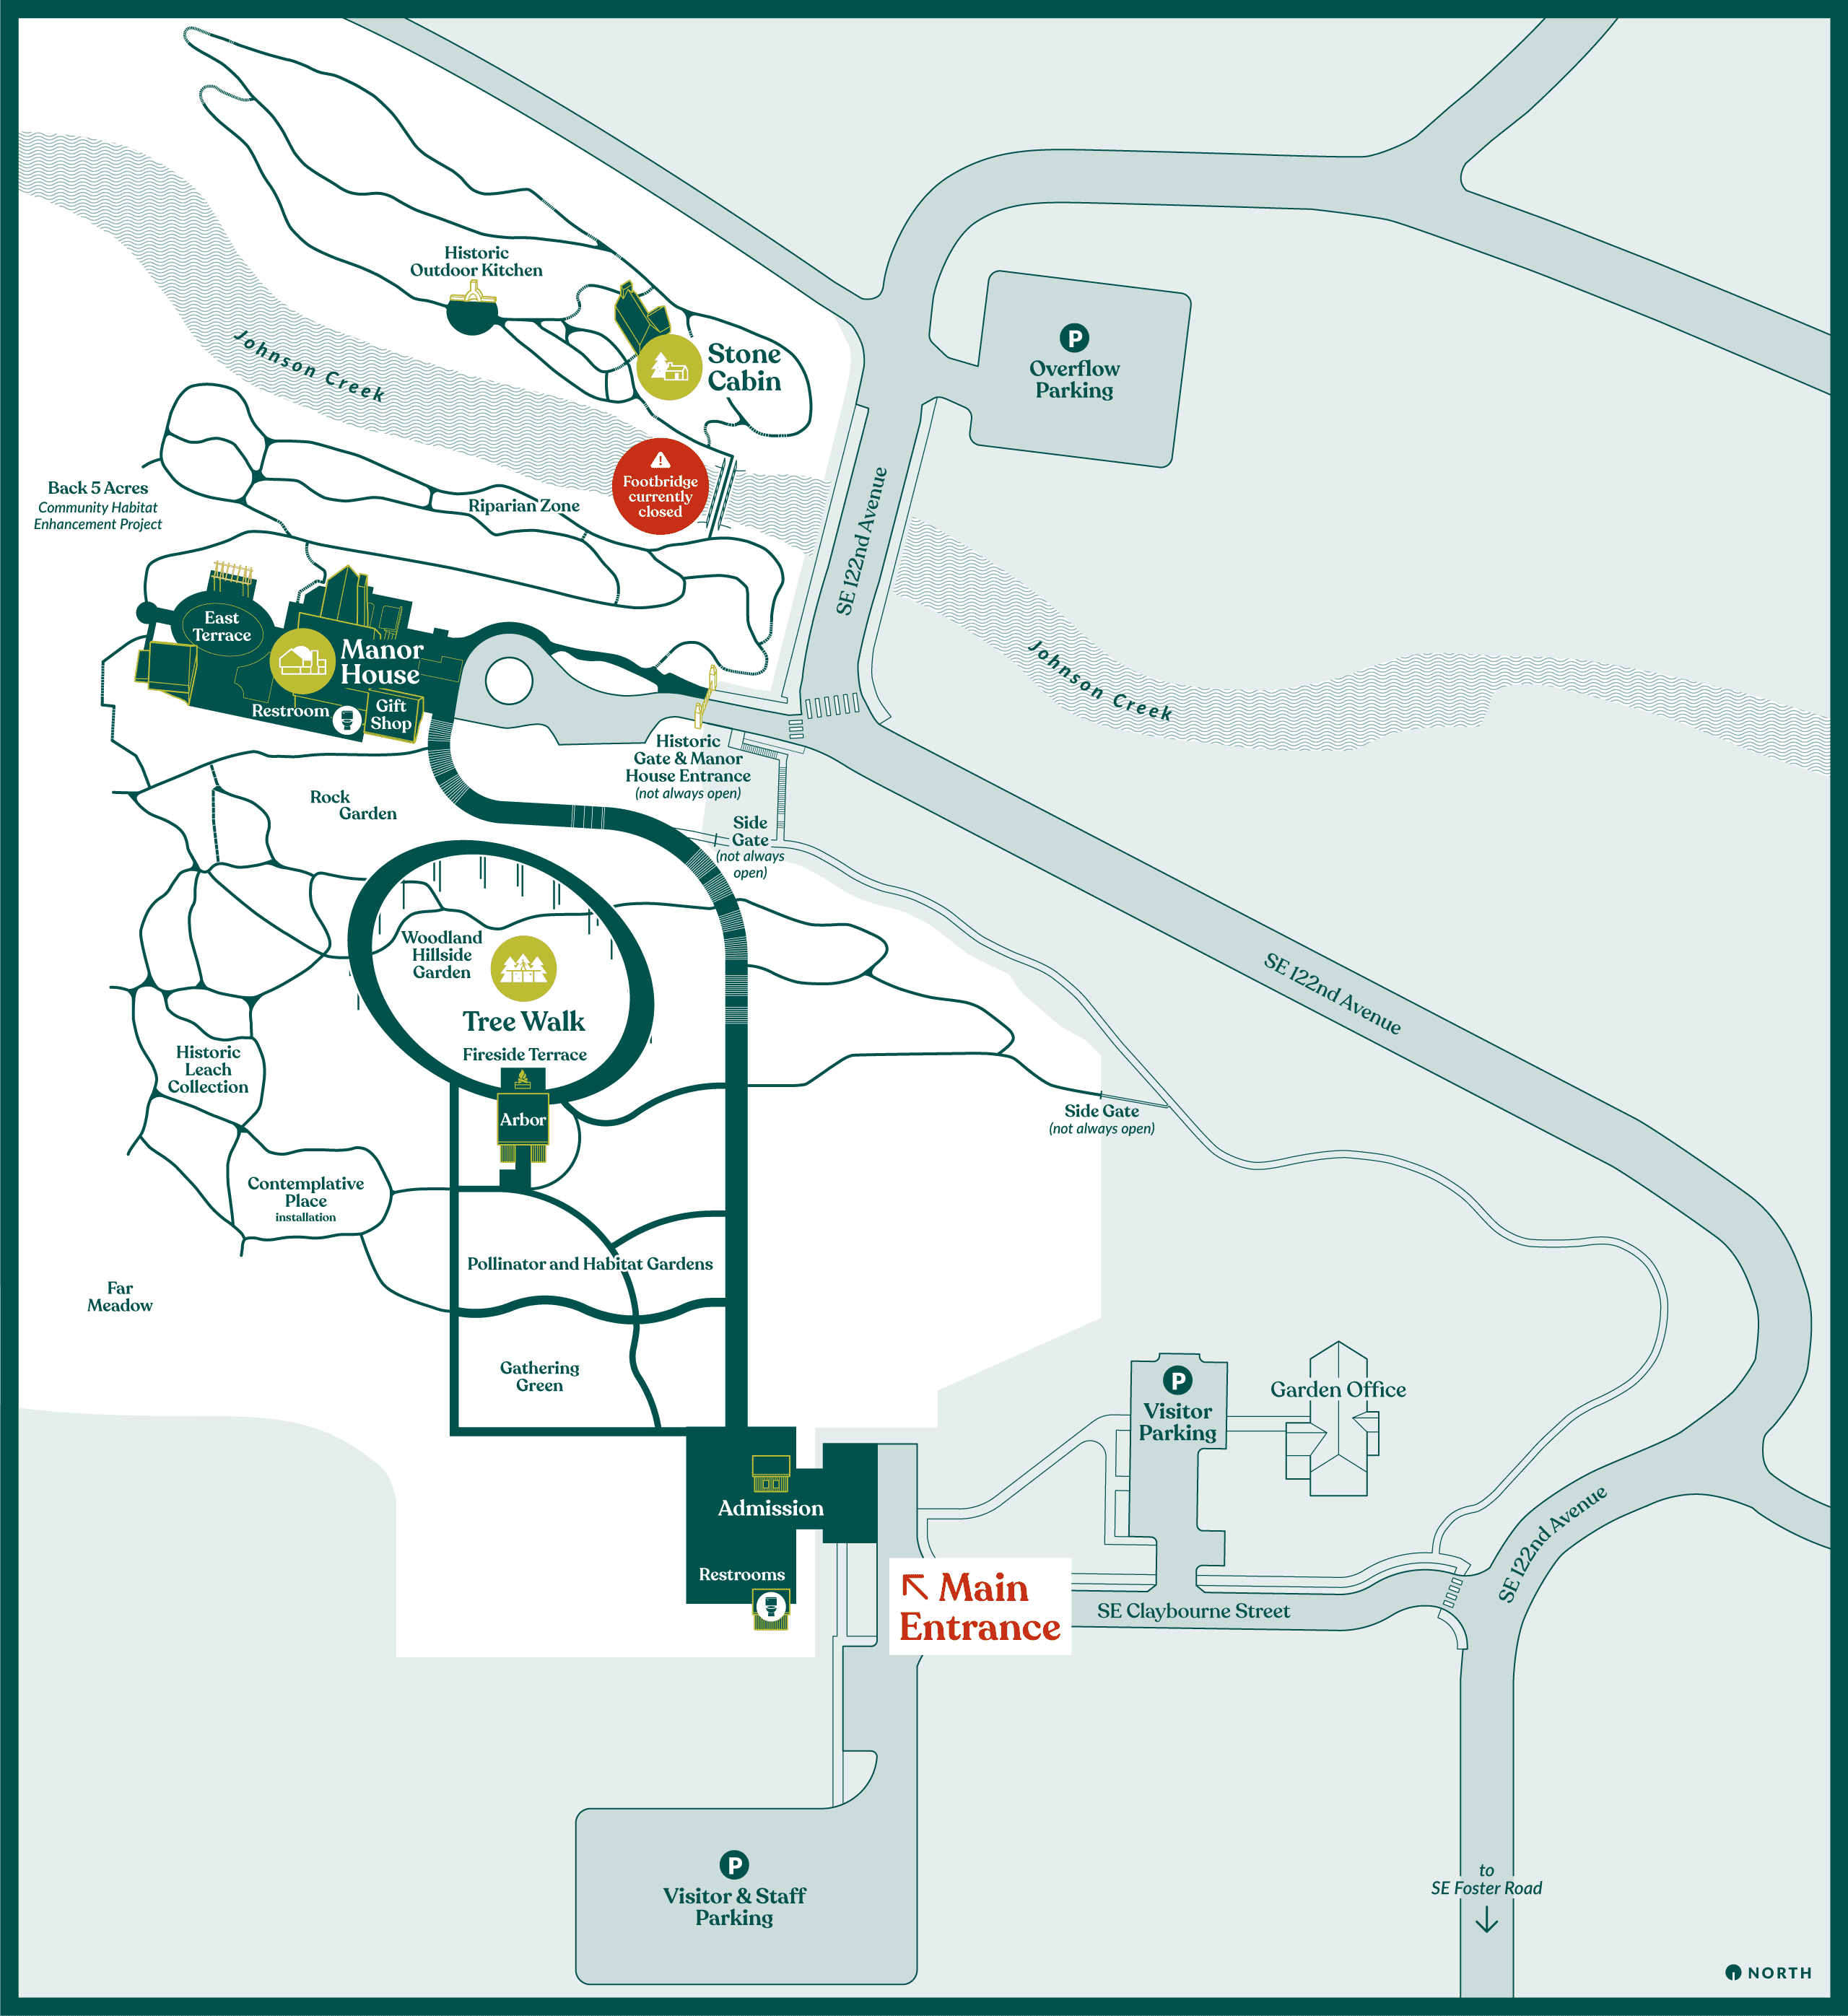 A map of the Leach Botanical Gardens and parking areas